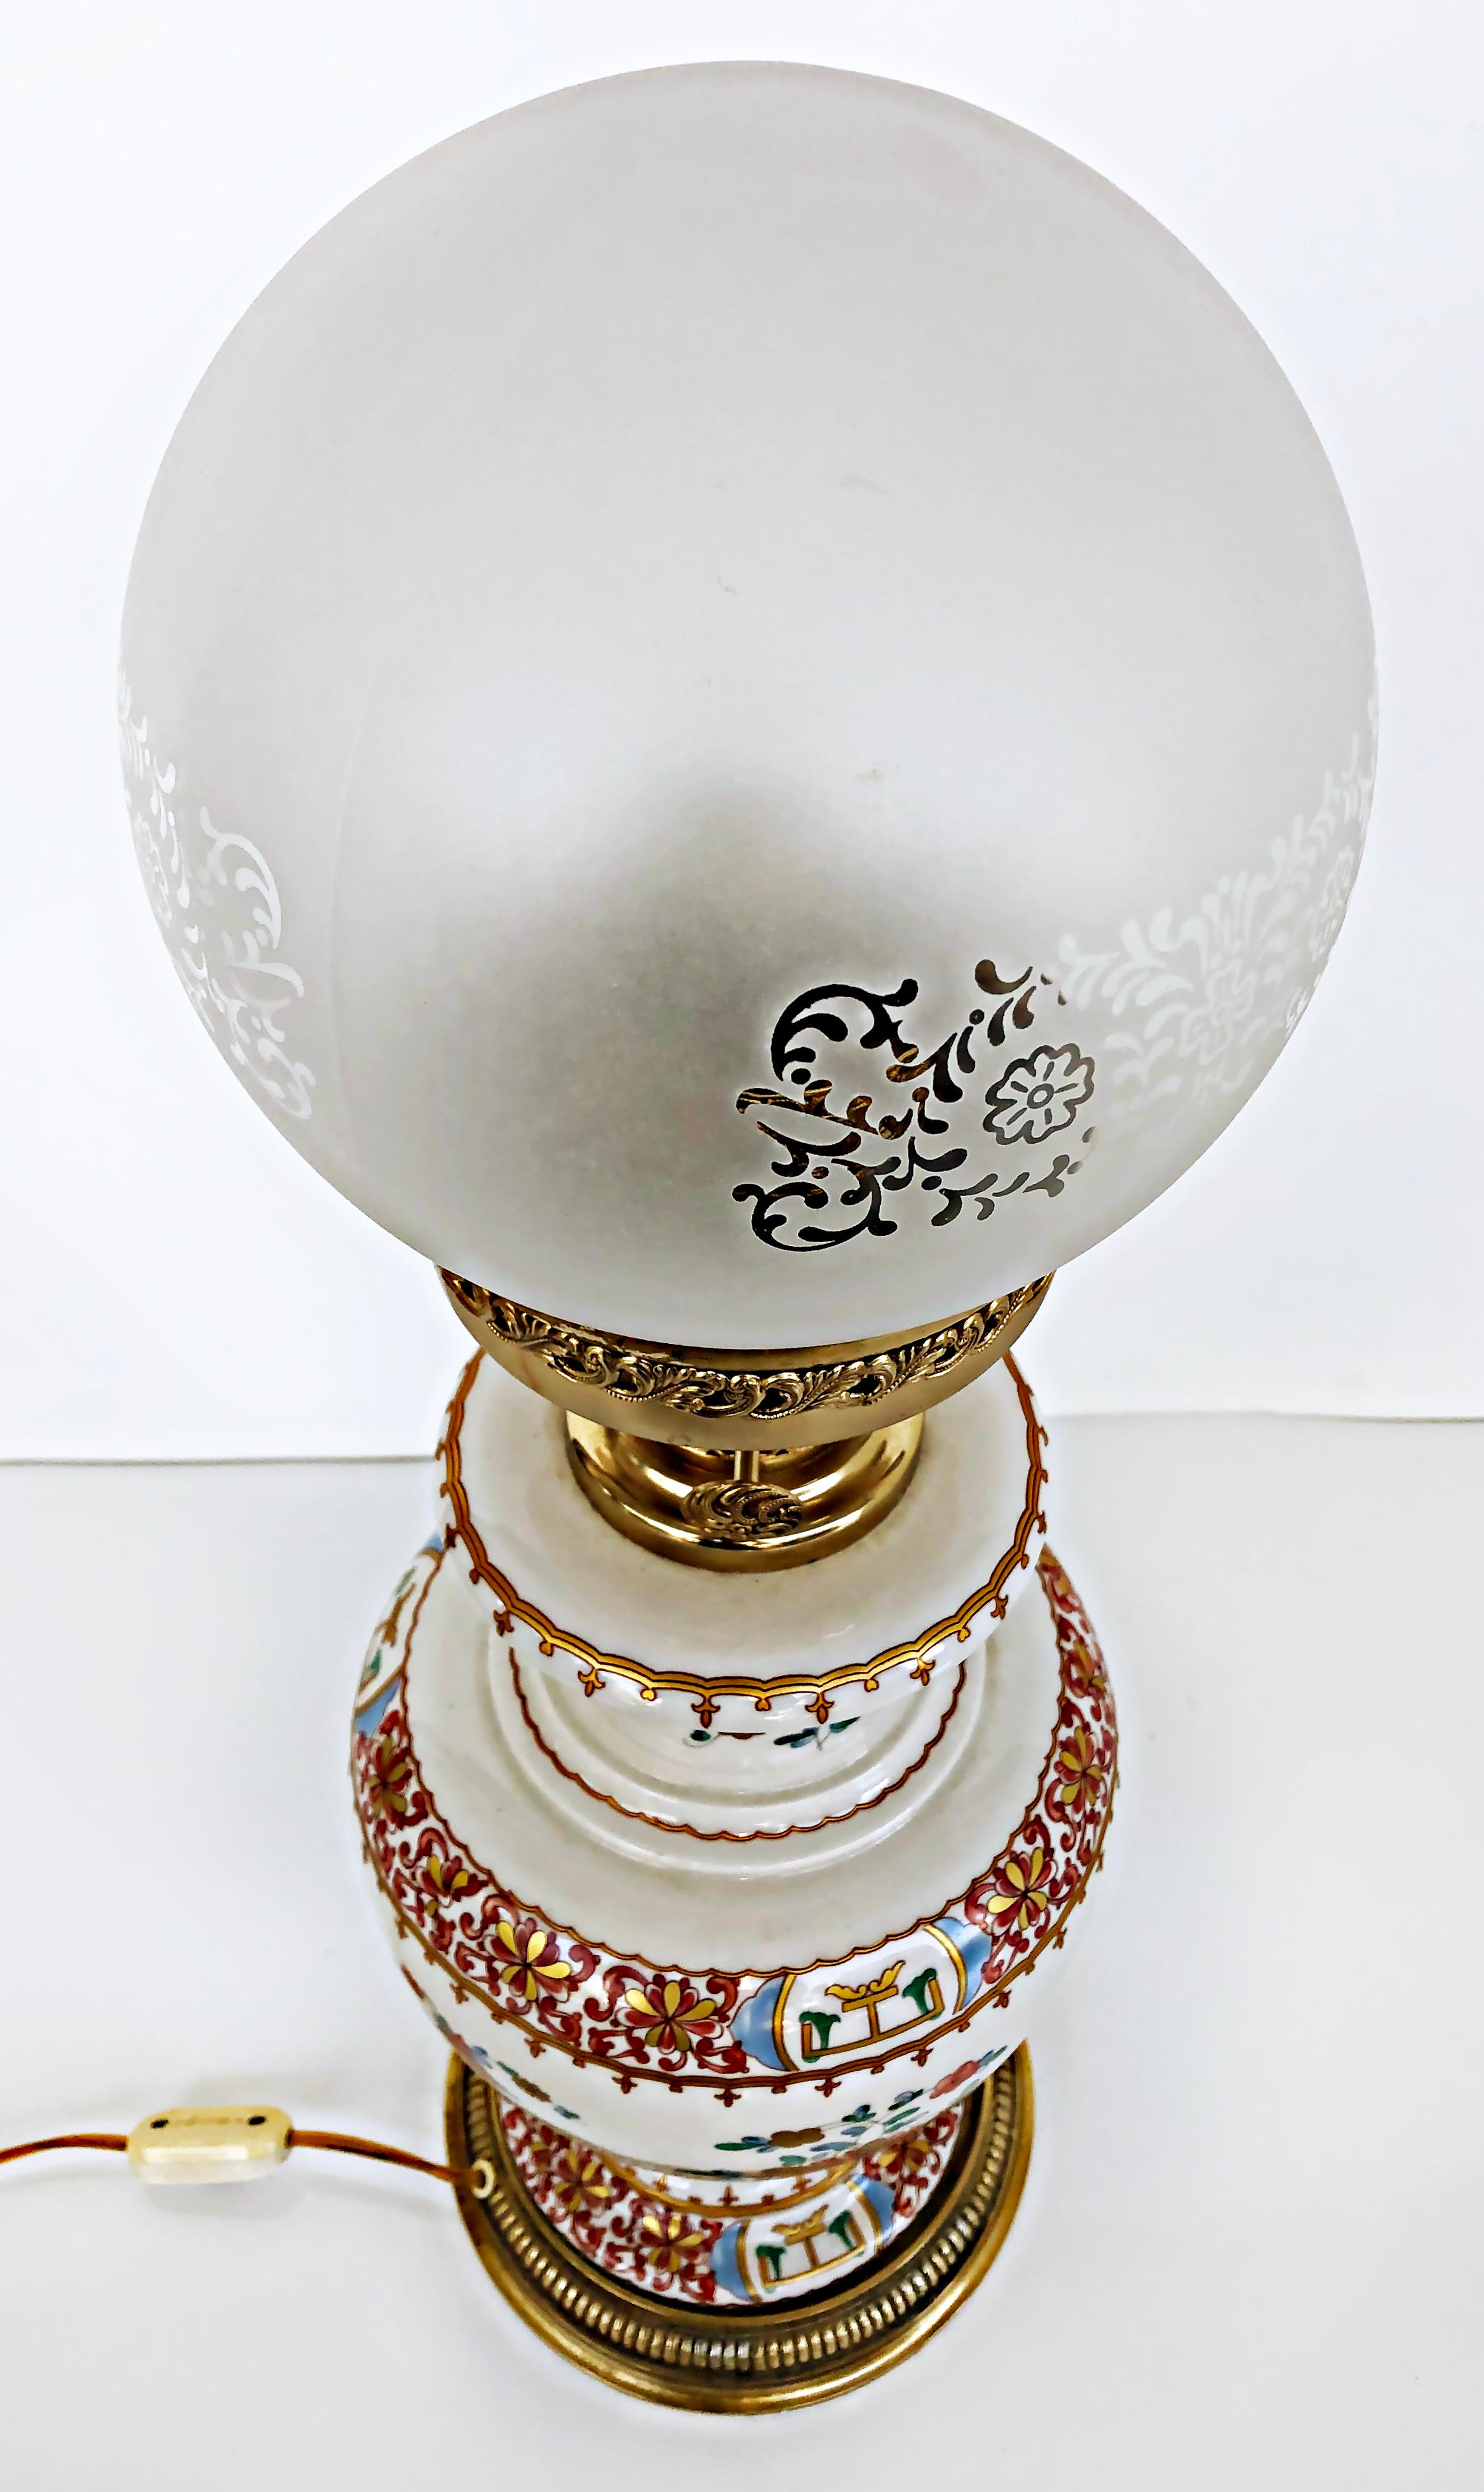 Italian Hand-painted Porcelain Oil Lamp, Electrified with Etched Glass Shade

Offered for sale is a late 20th-century Italian hand-painted porcelain oil lamp with an etched glass globe shade. The lamp is electrified and has brass fittings. The